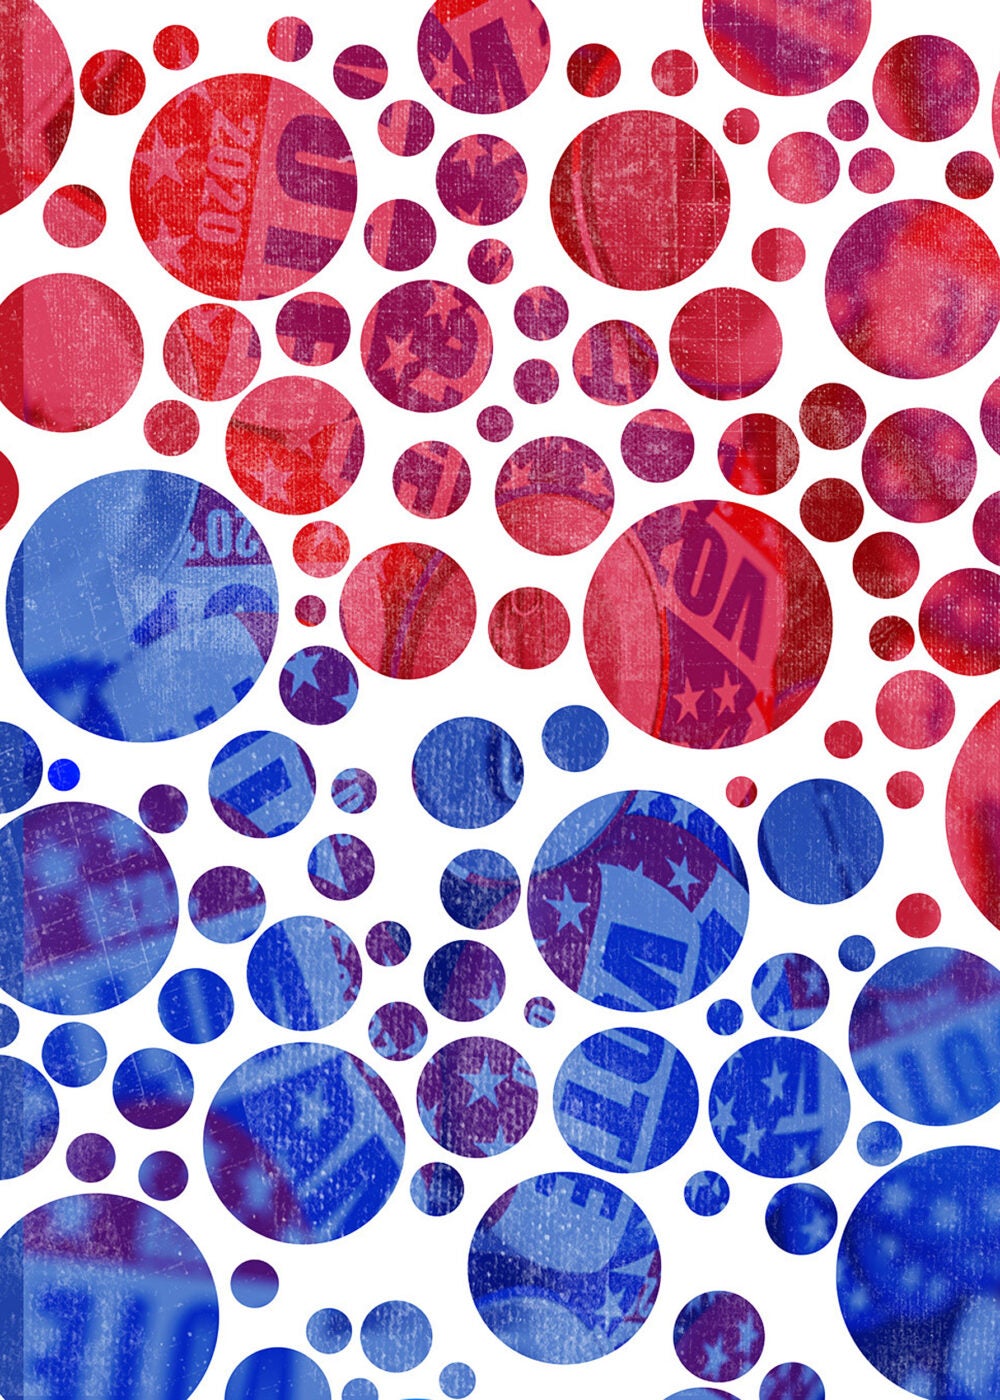 Red and blue bubbles.